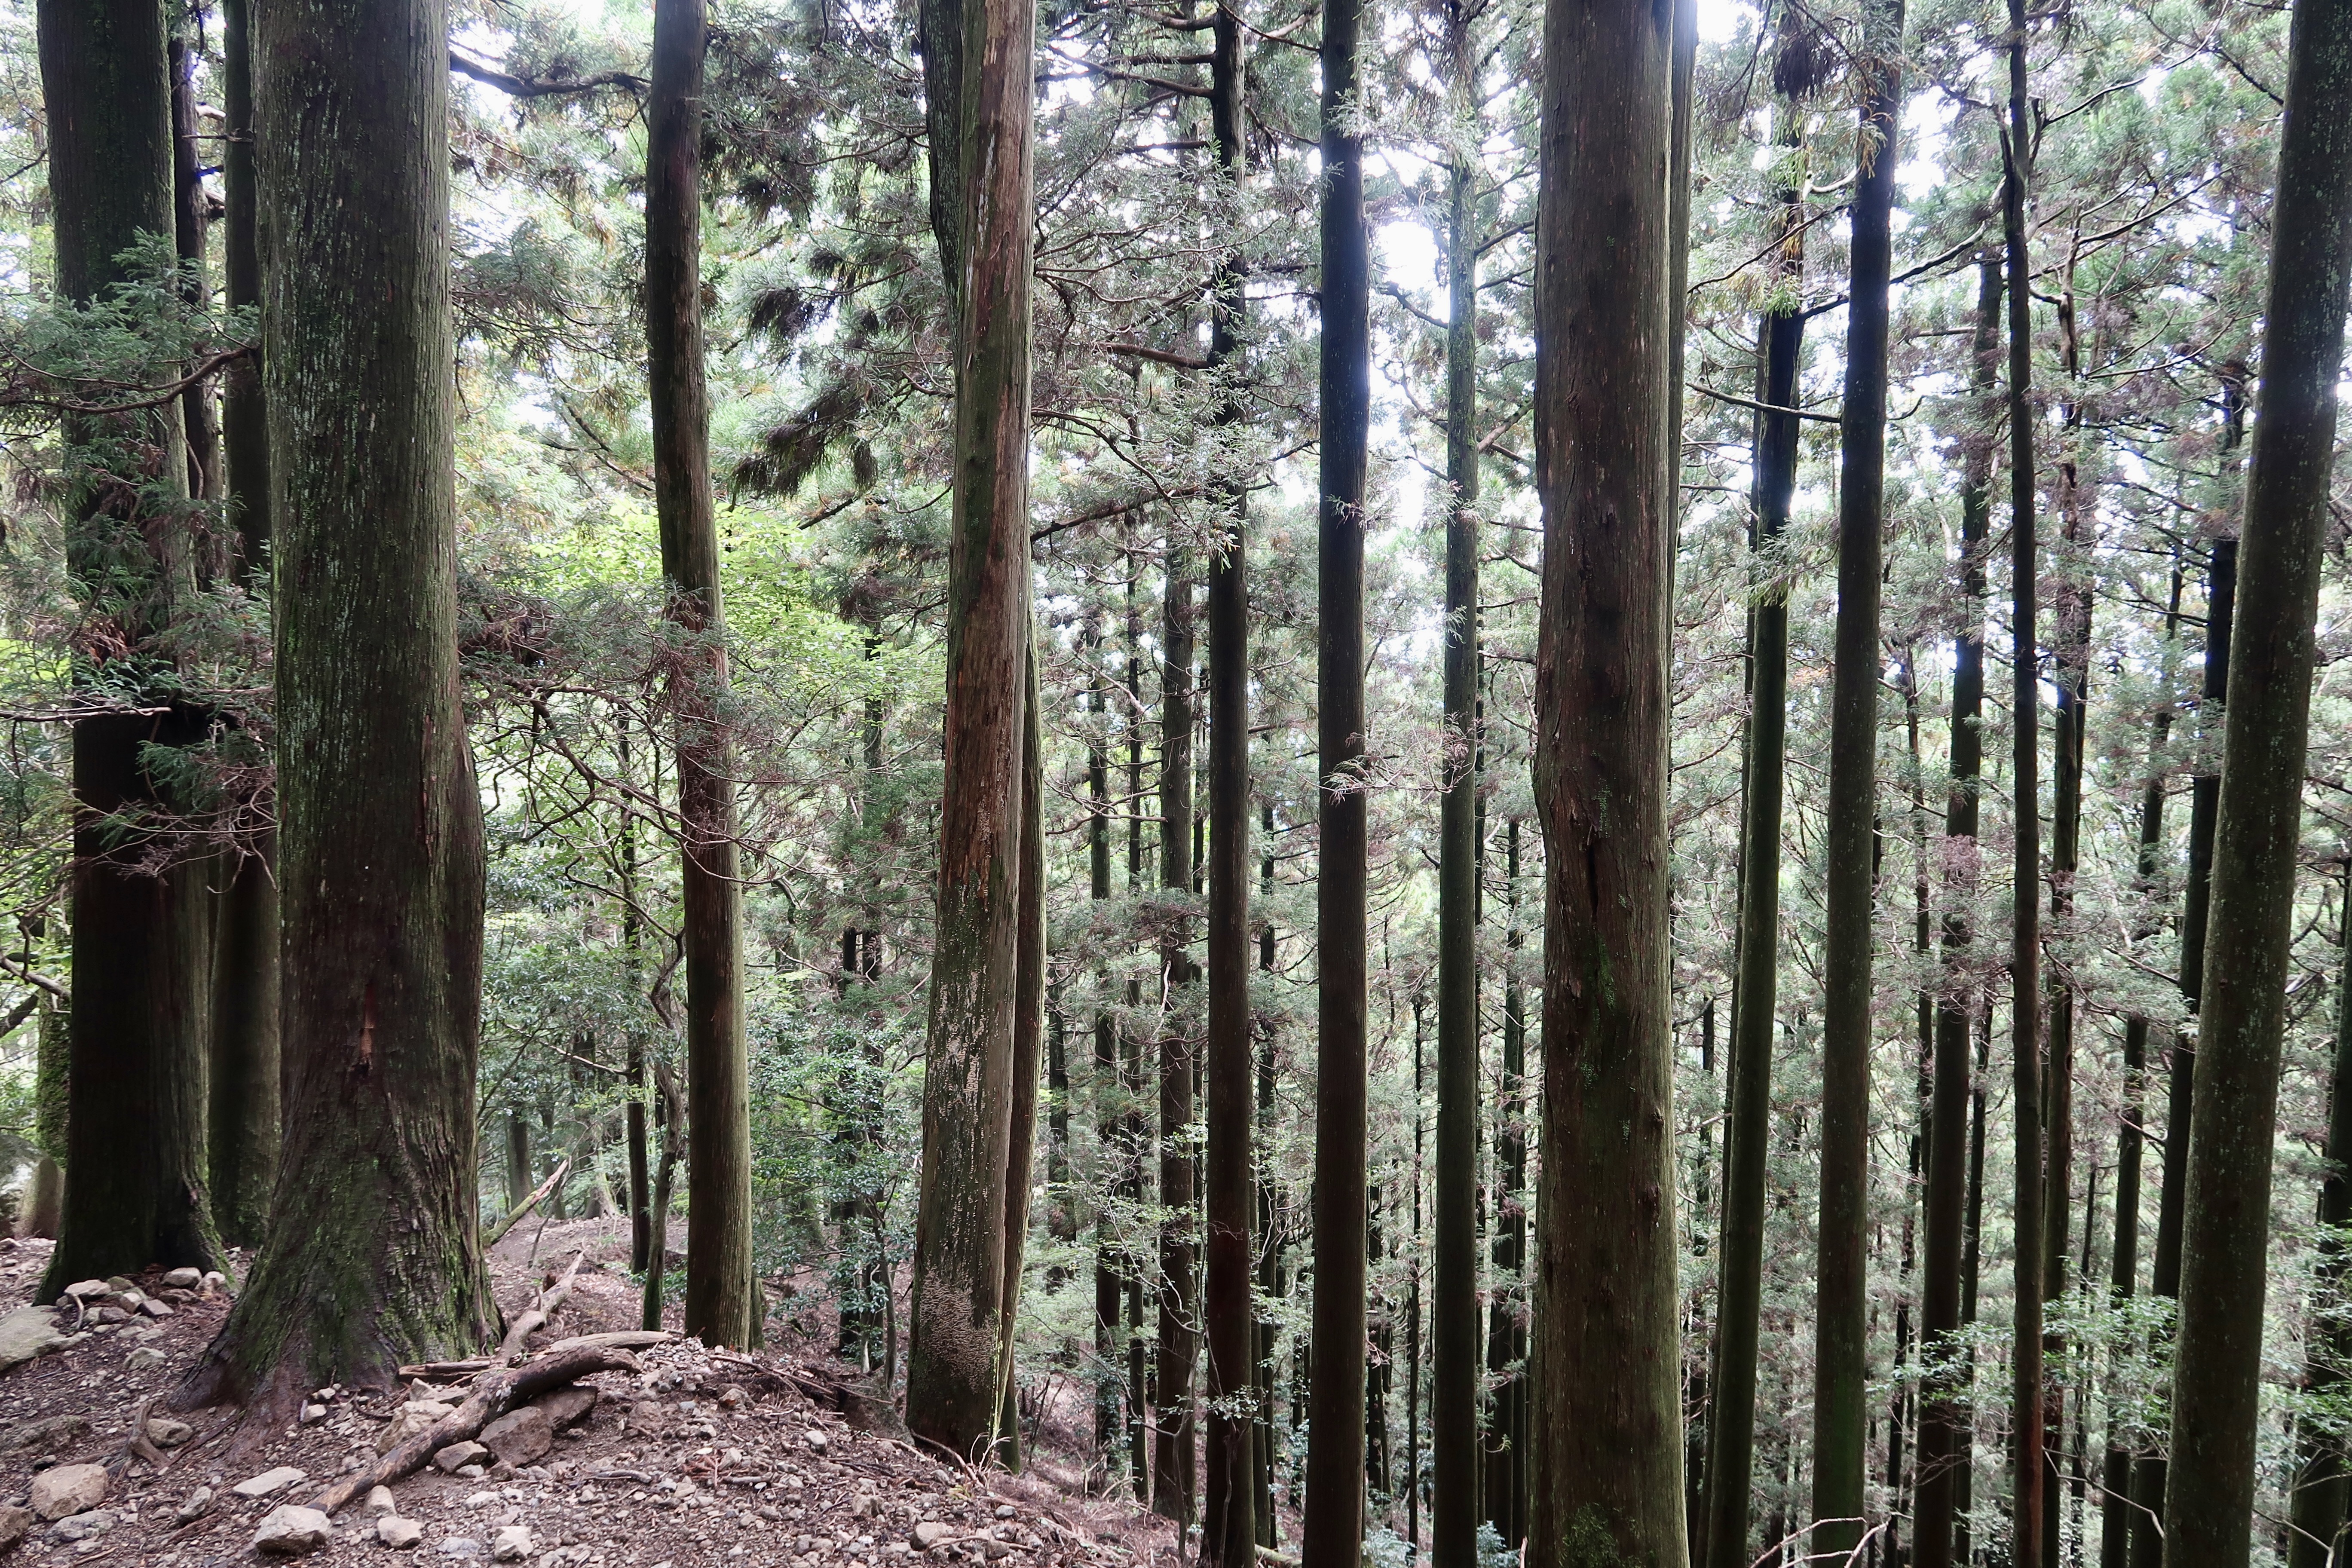 The forest primarily consists of cedar trees